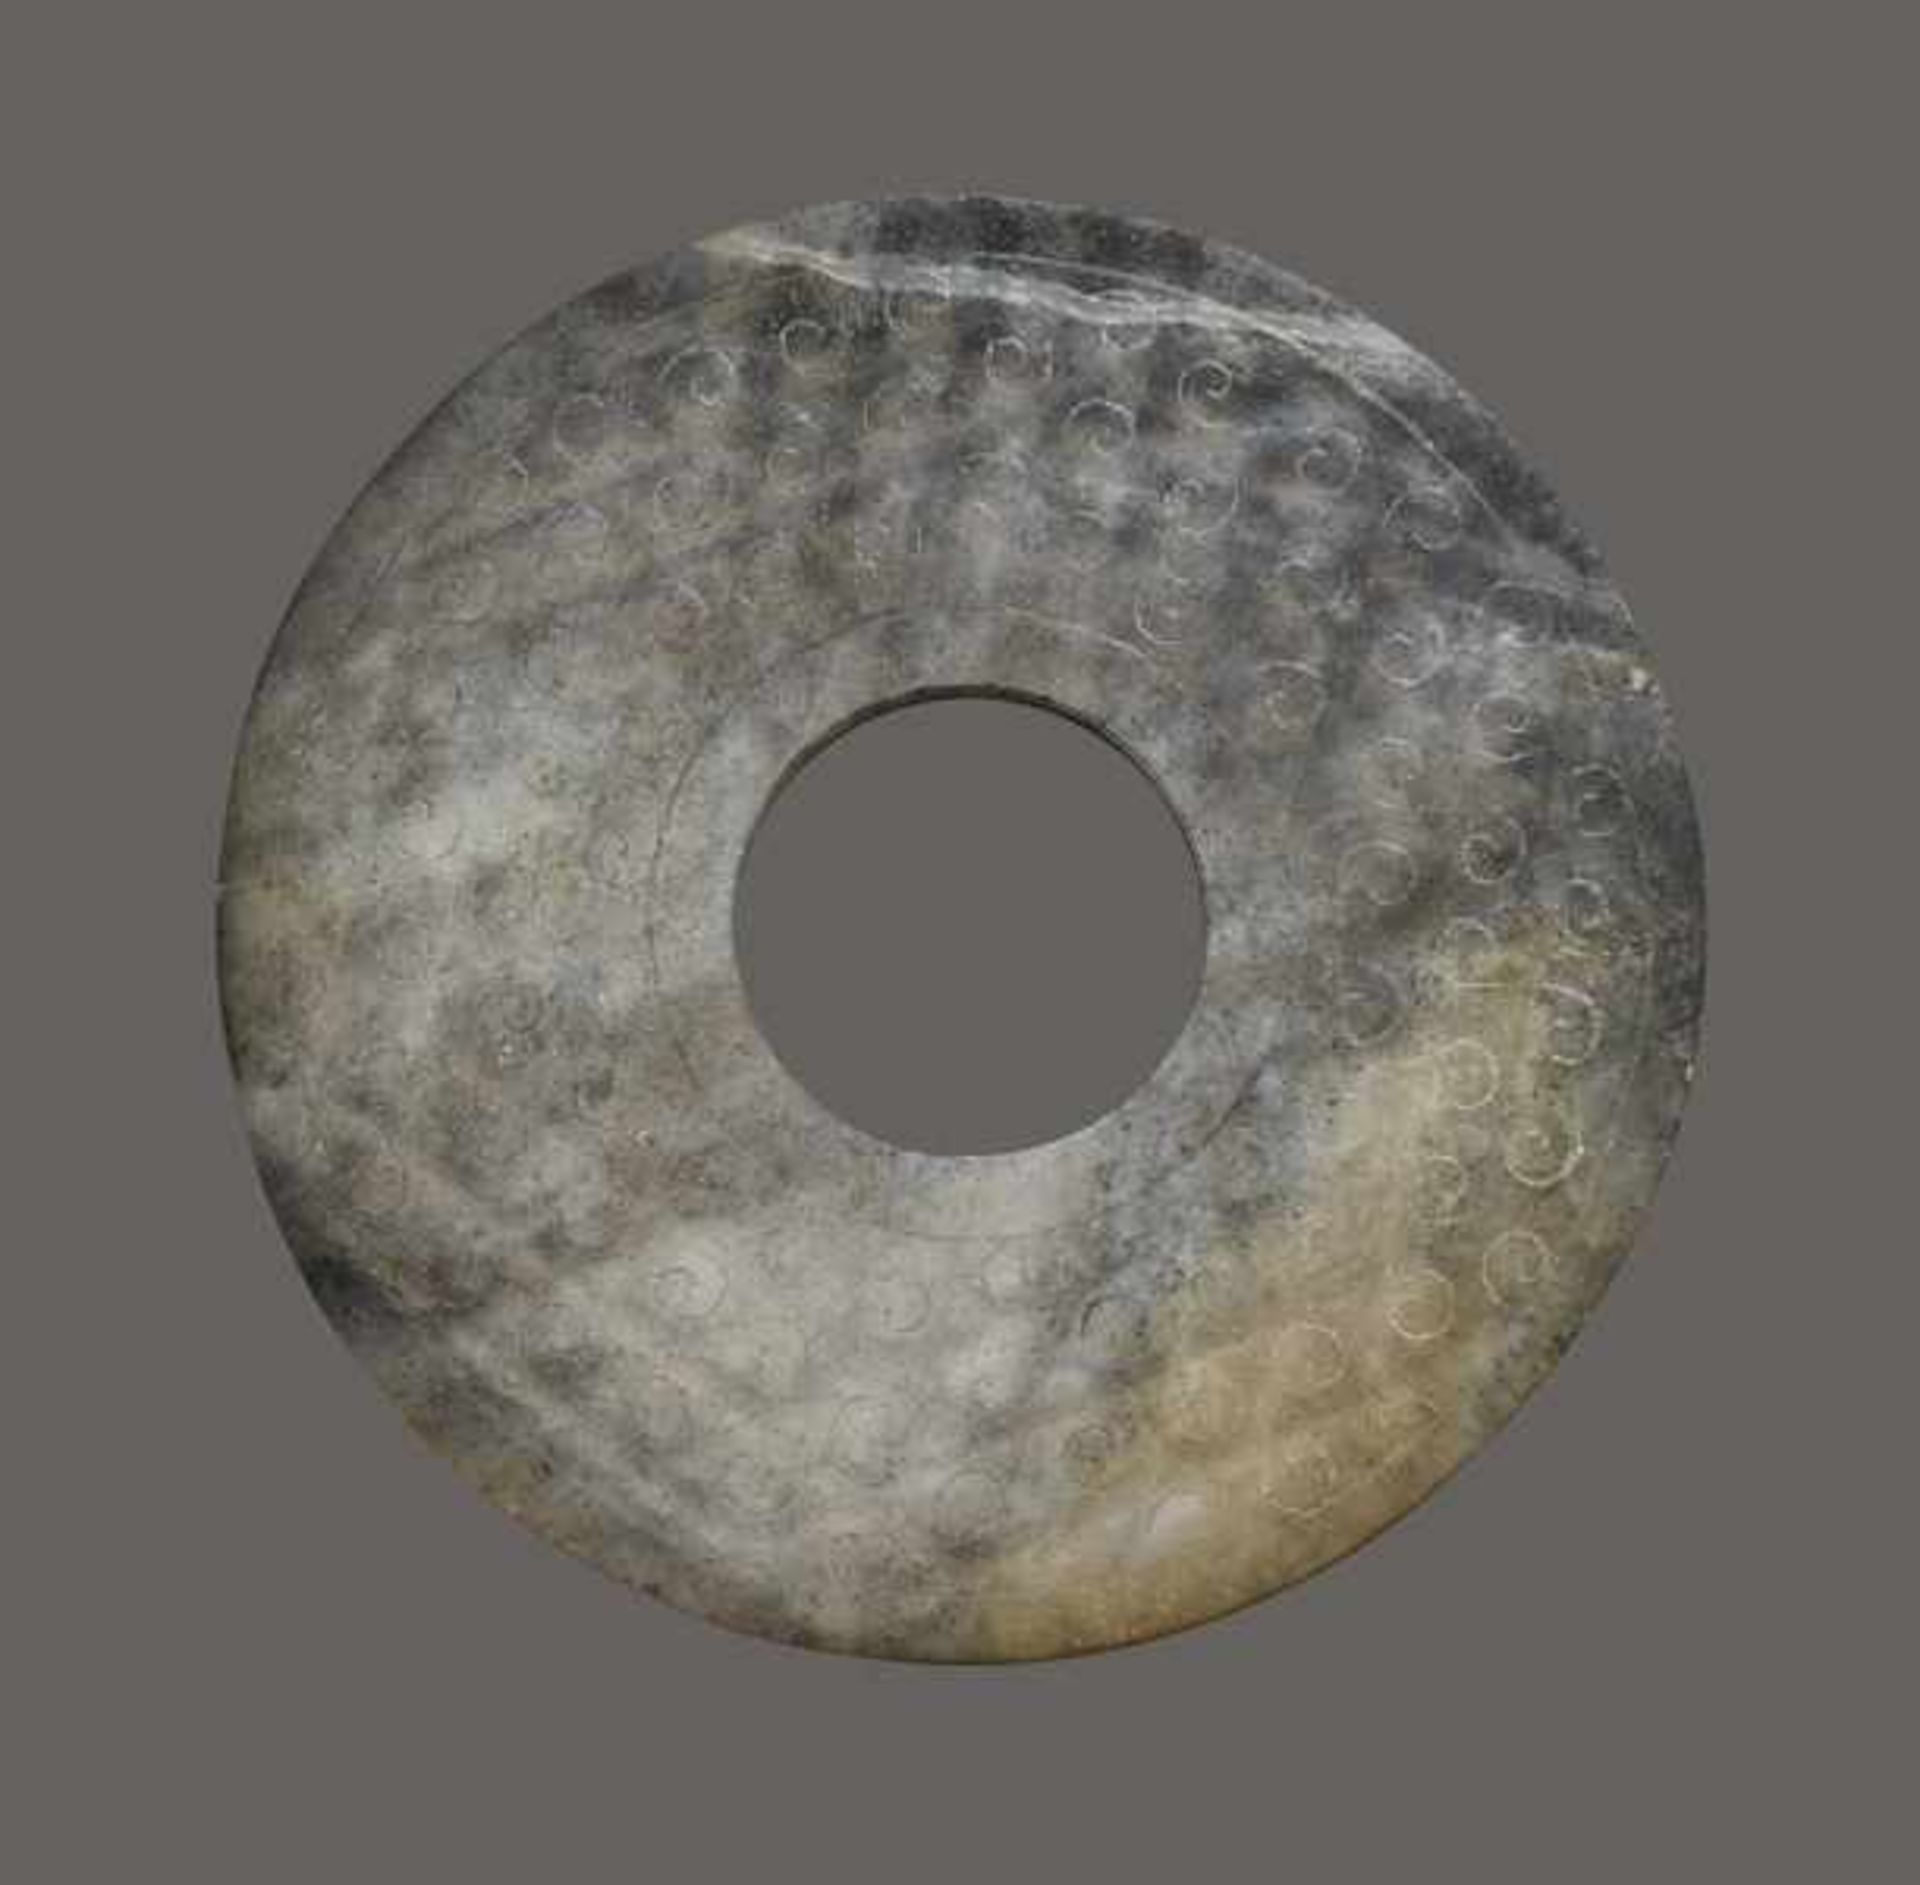 BI WITH SPIRAL CLOUDS DECORATION Jade. China, Han dynasty, 206 BC - 220 CEWhite-gray to black